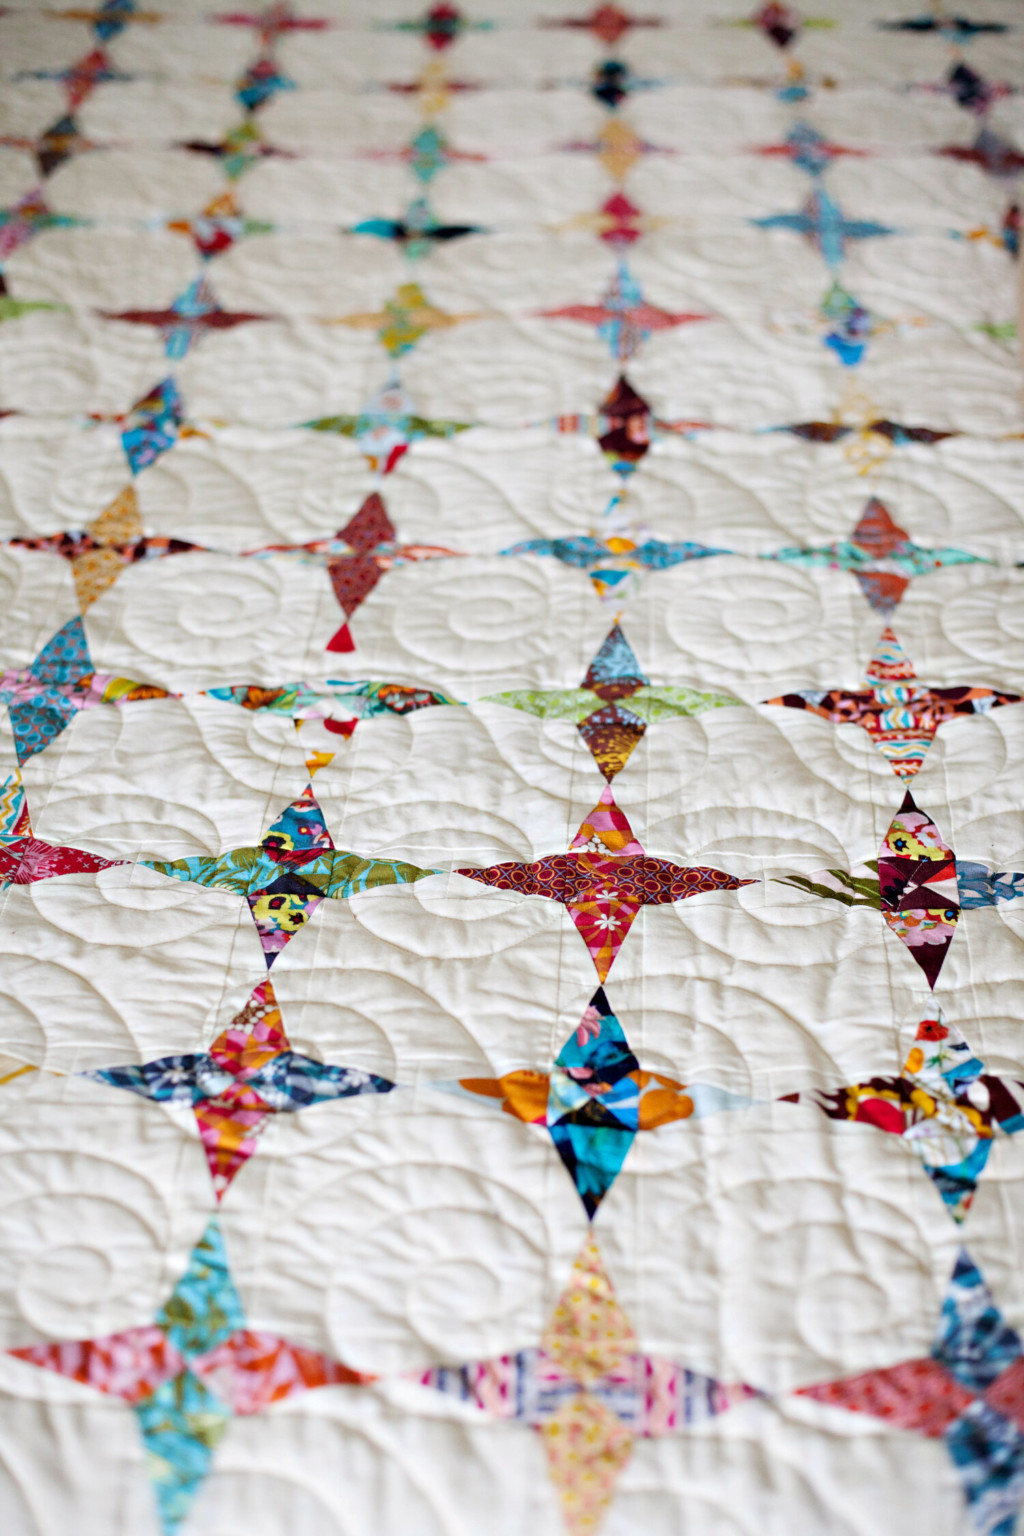 The luminaries quilt in while and multi colored fabric, layed out flate